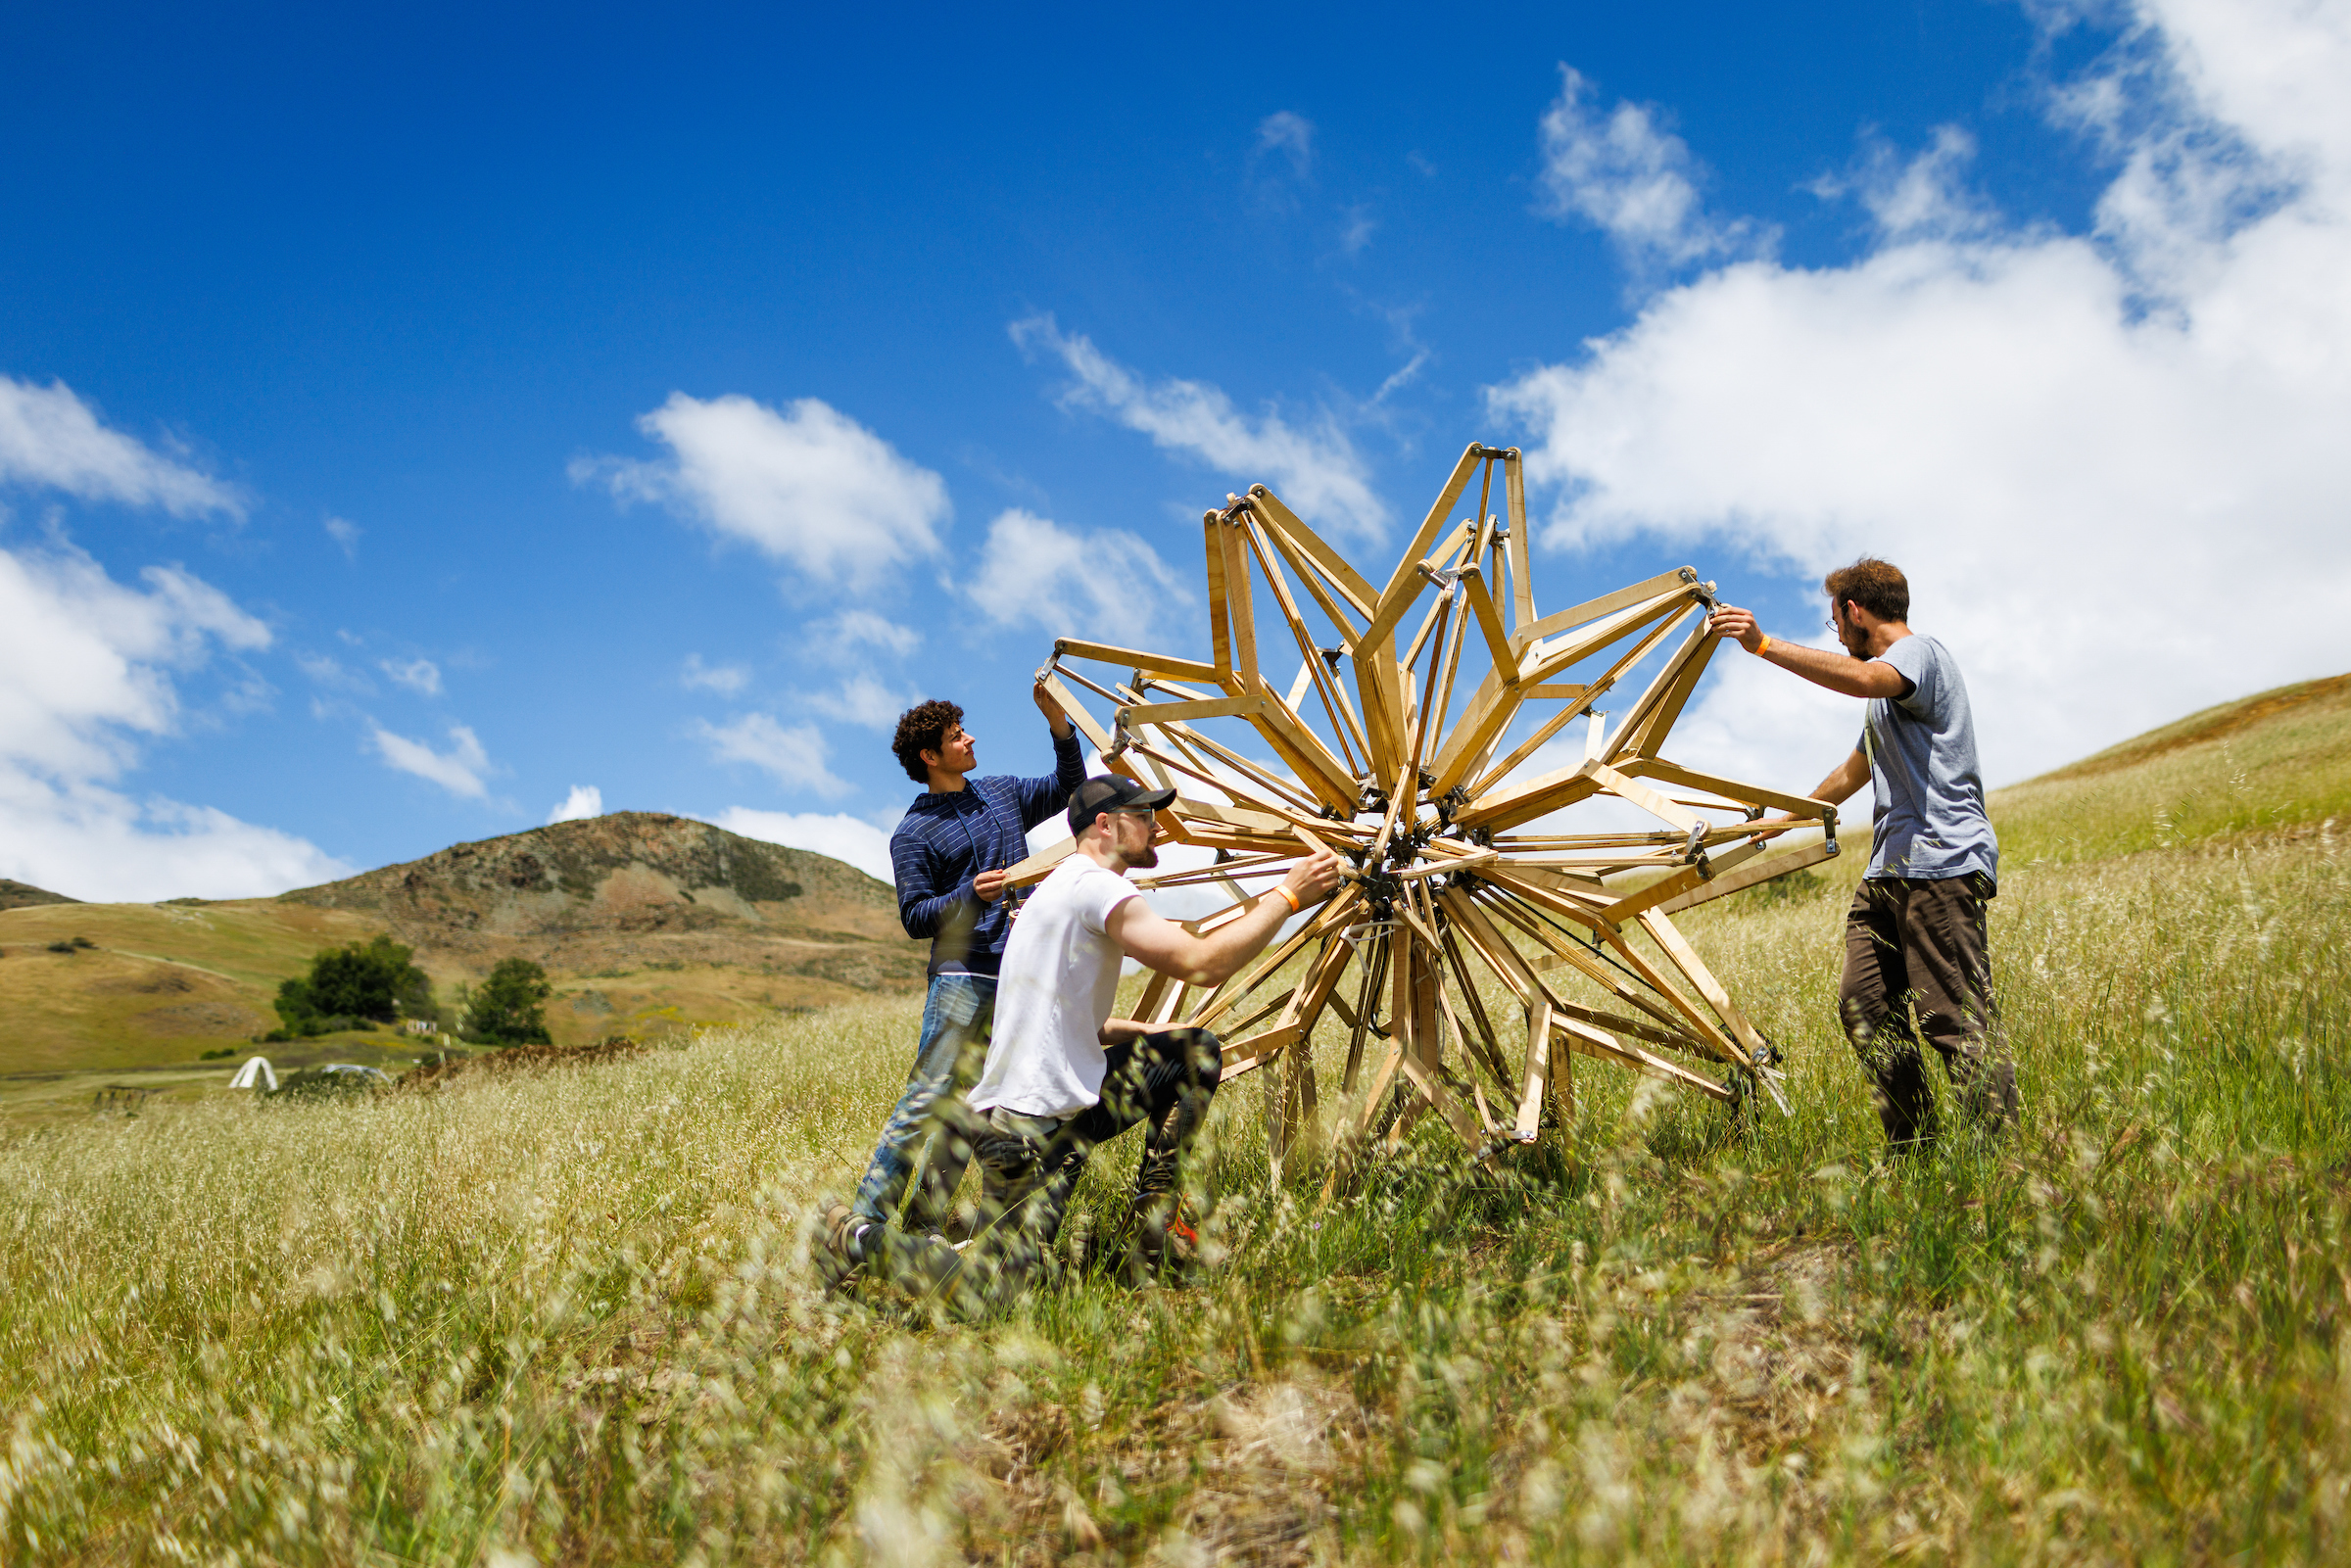 Architecture students set up a wooden spherical structure in Poly Canyon during design village.